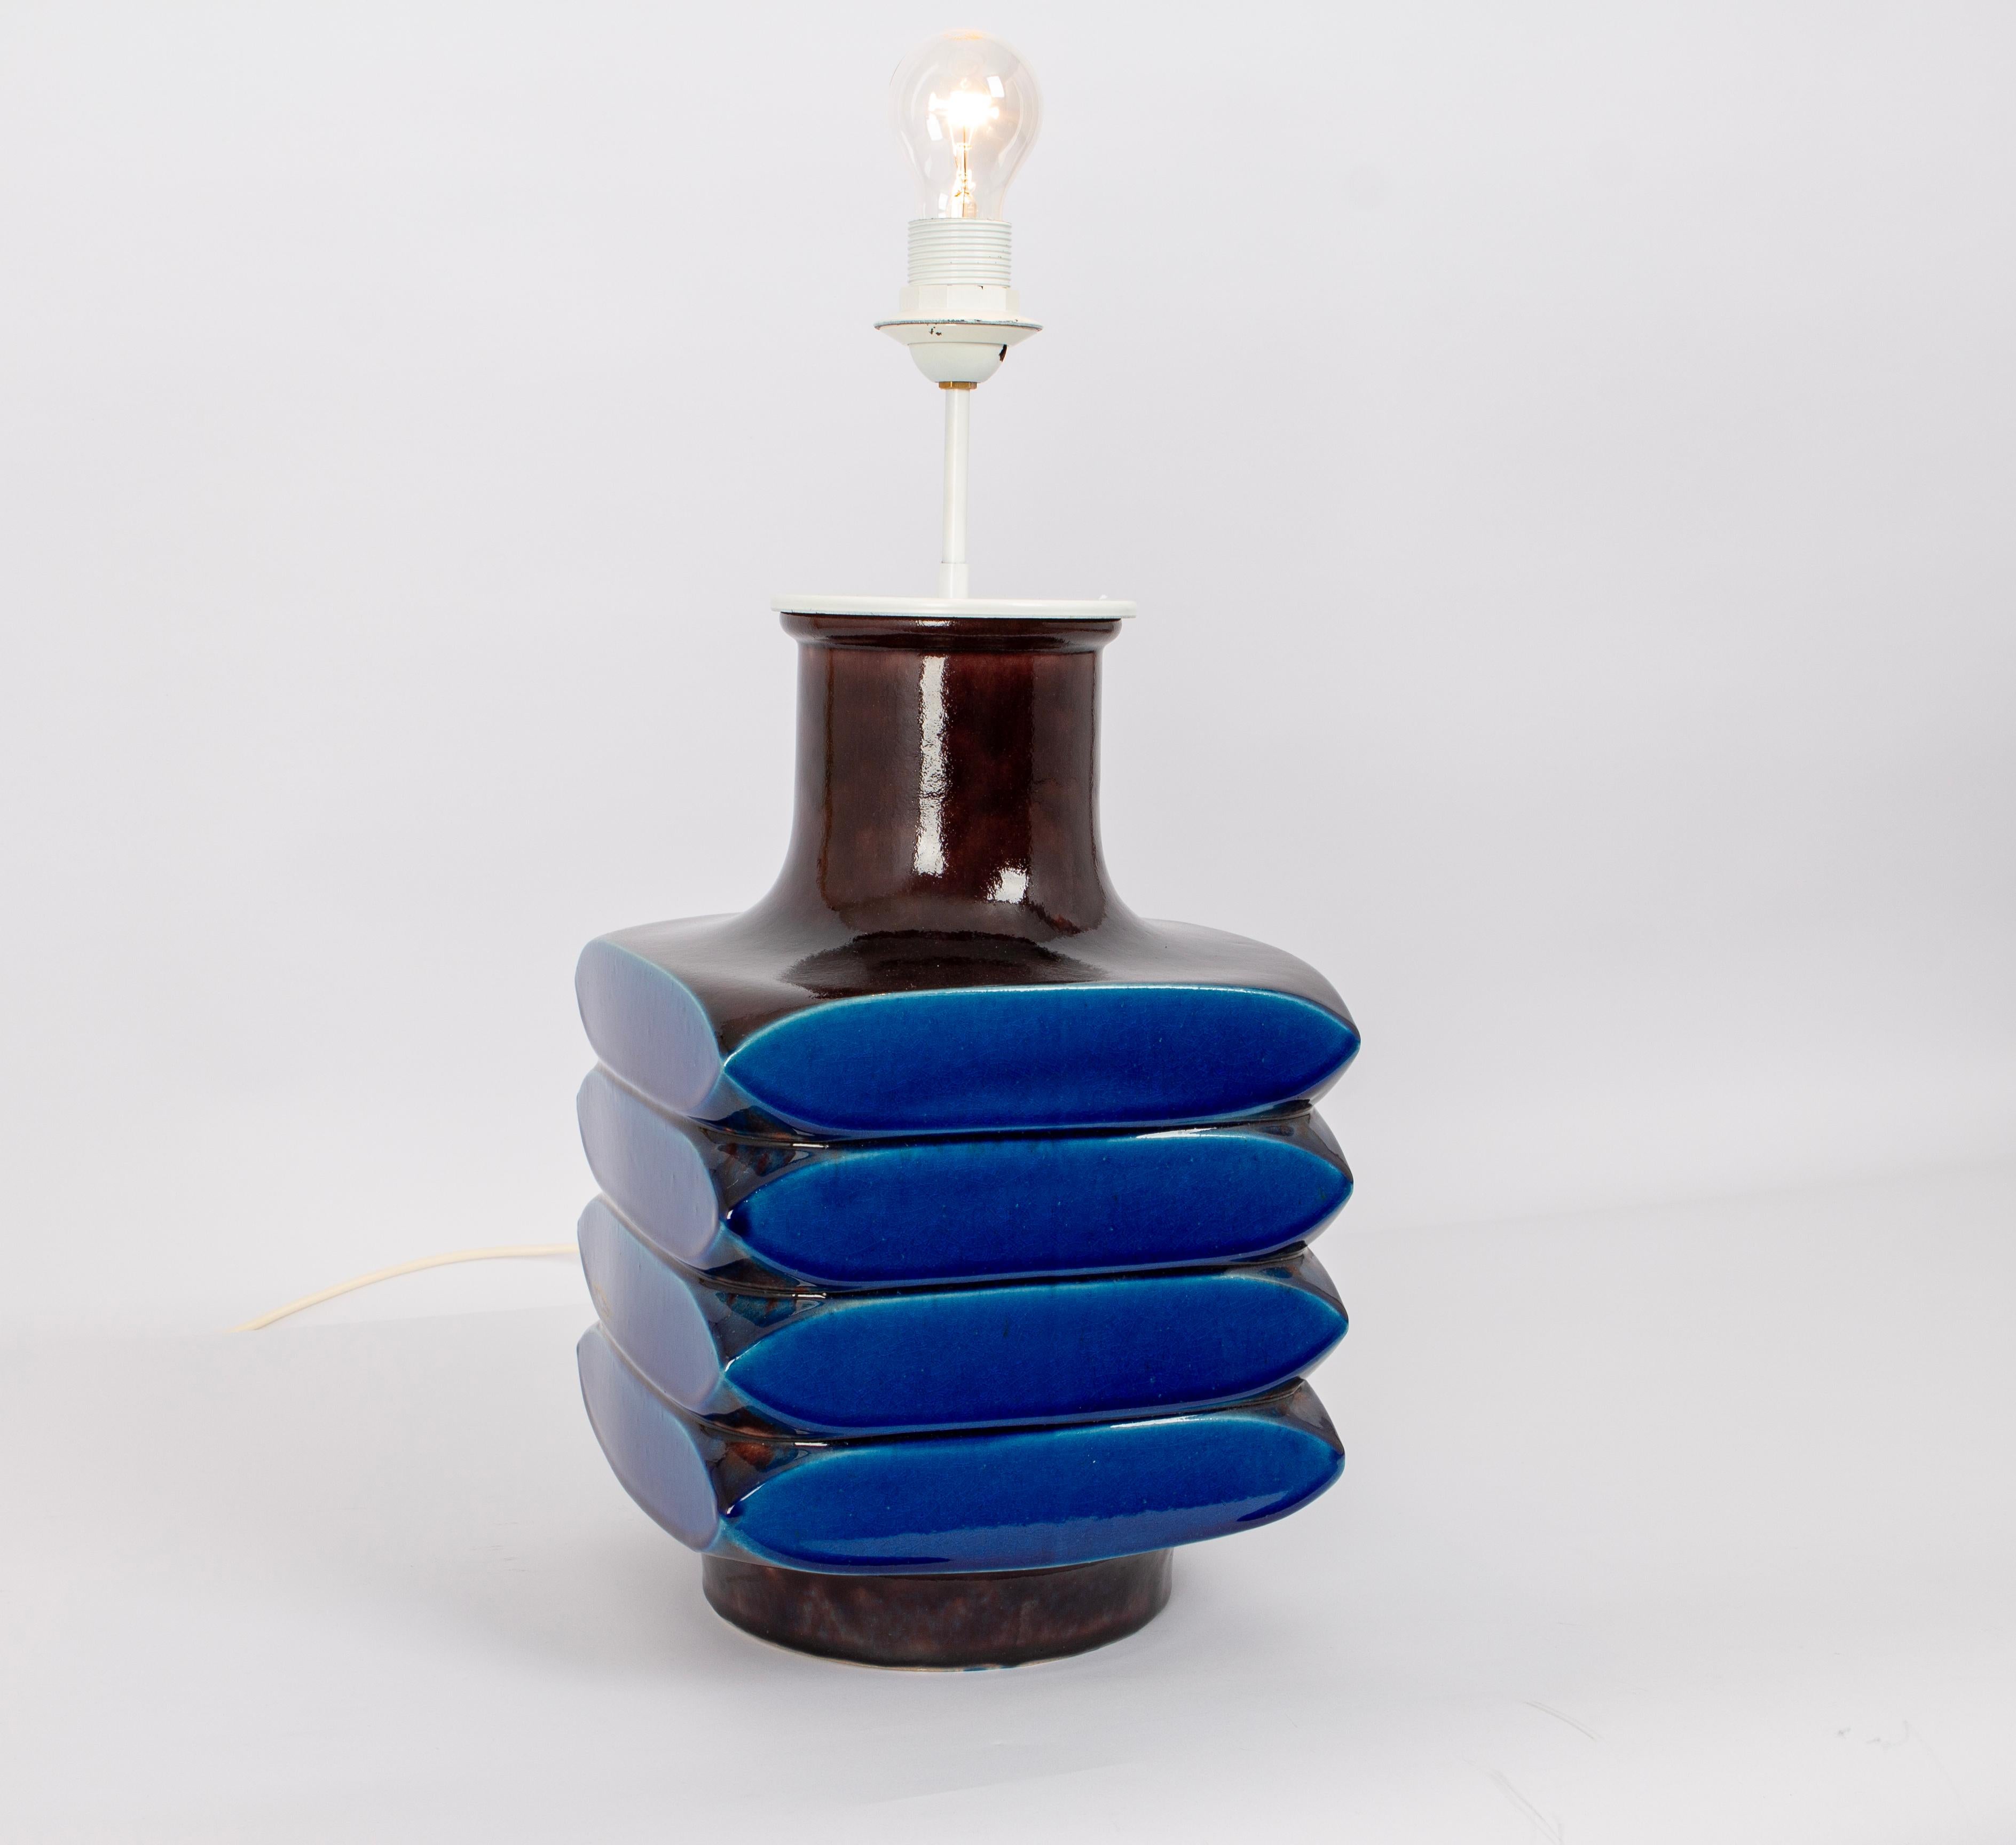 Large ceramic table lamp designed by Cari Zalloni, Germany, 1970s
Stunning form and color- Good quality and in a good condition with signs of age and use. Cleaned, well-wired, and ready to use. The Table lamp requires one E27 Standard bulb with 100W